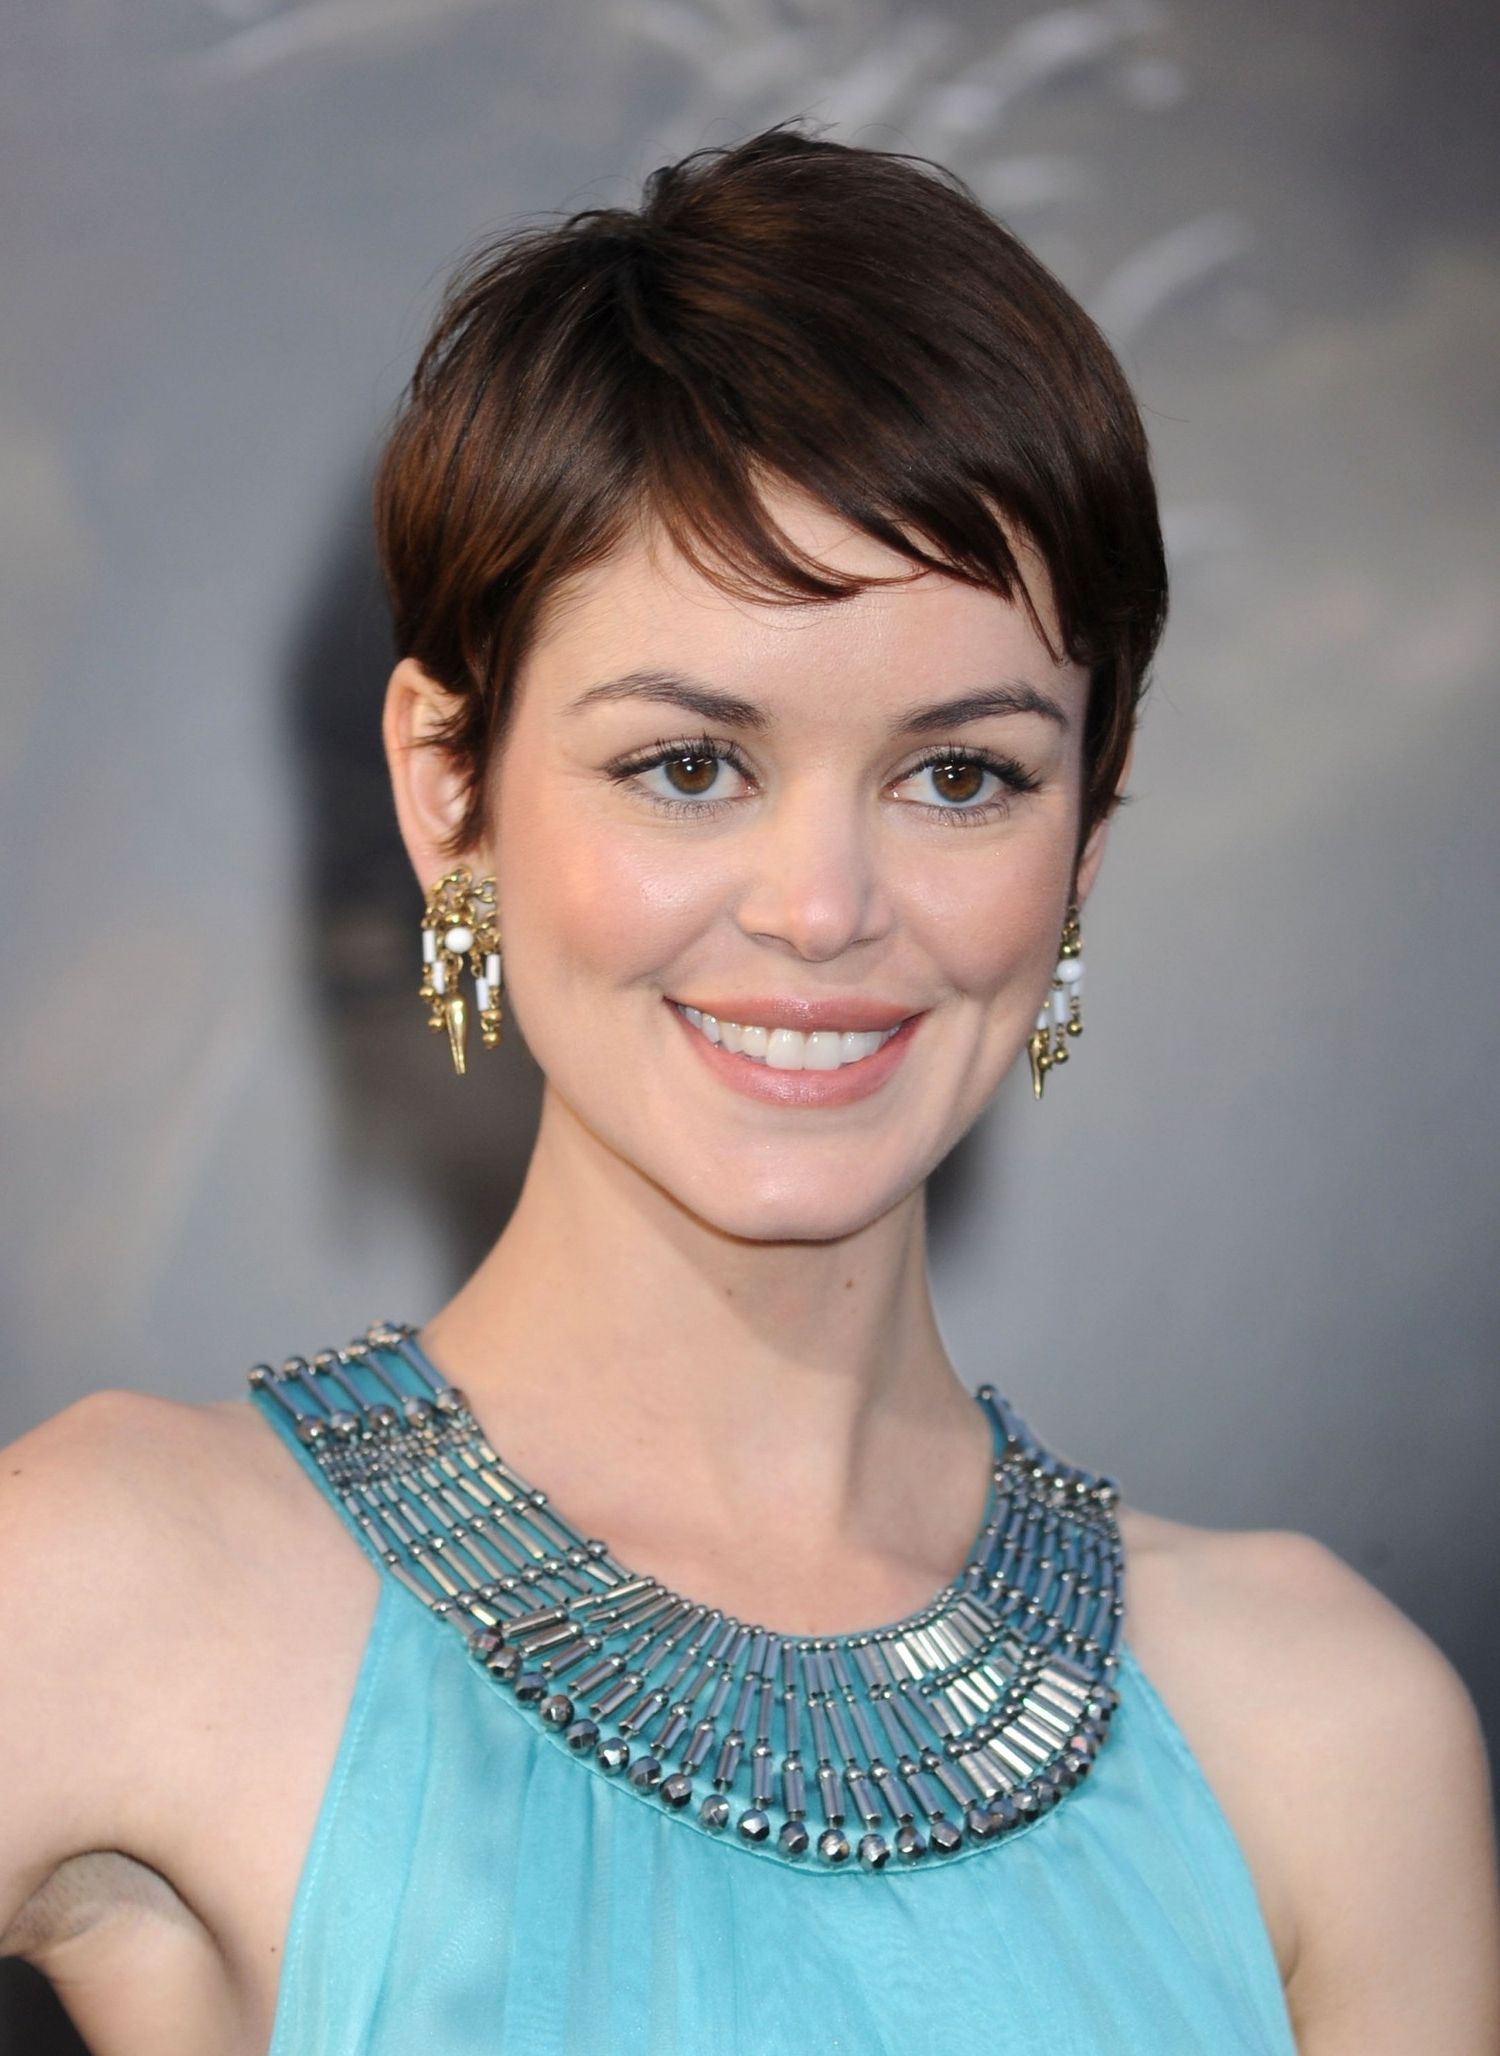 19 Cute Celebrity Haircuts To Consider | Glamour For Best And Newest Celebrities Pixie Hairstyles (View 5 of 15)